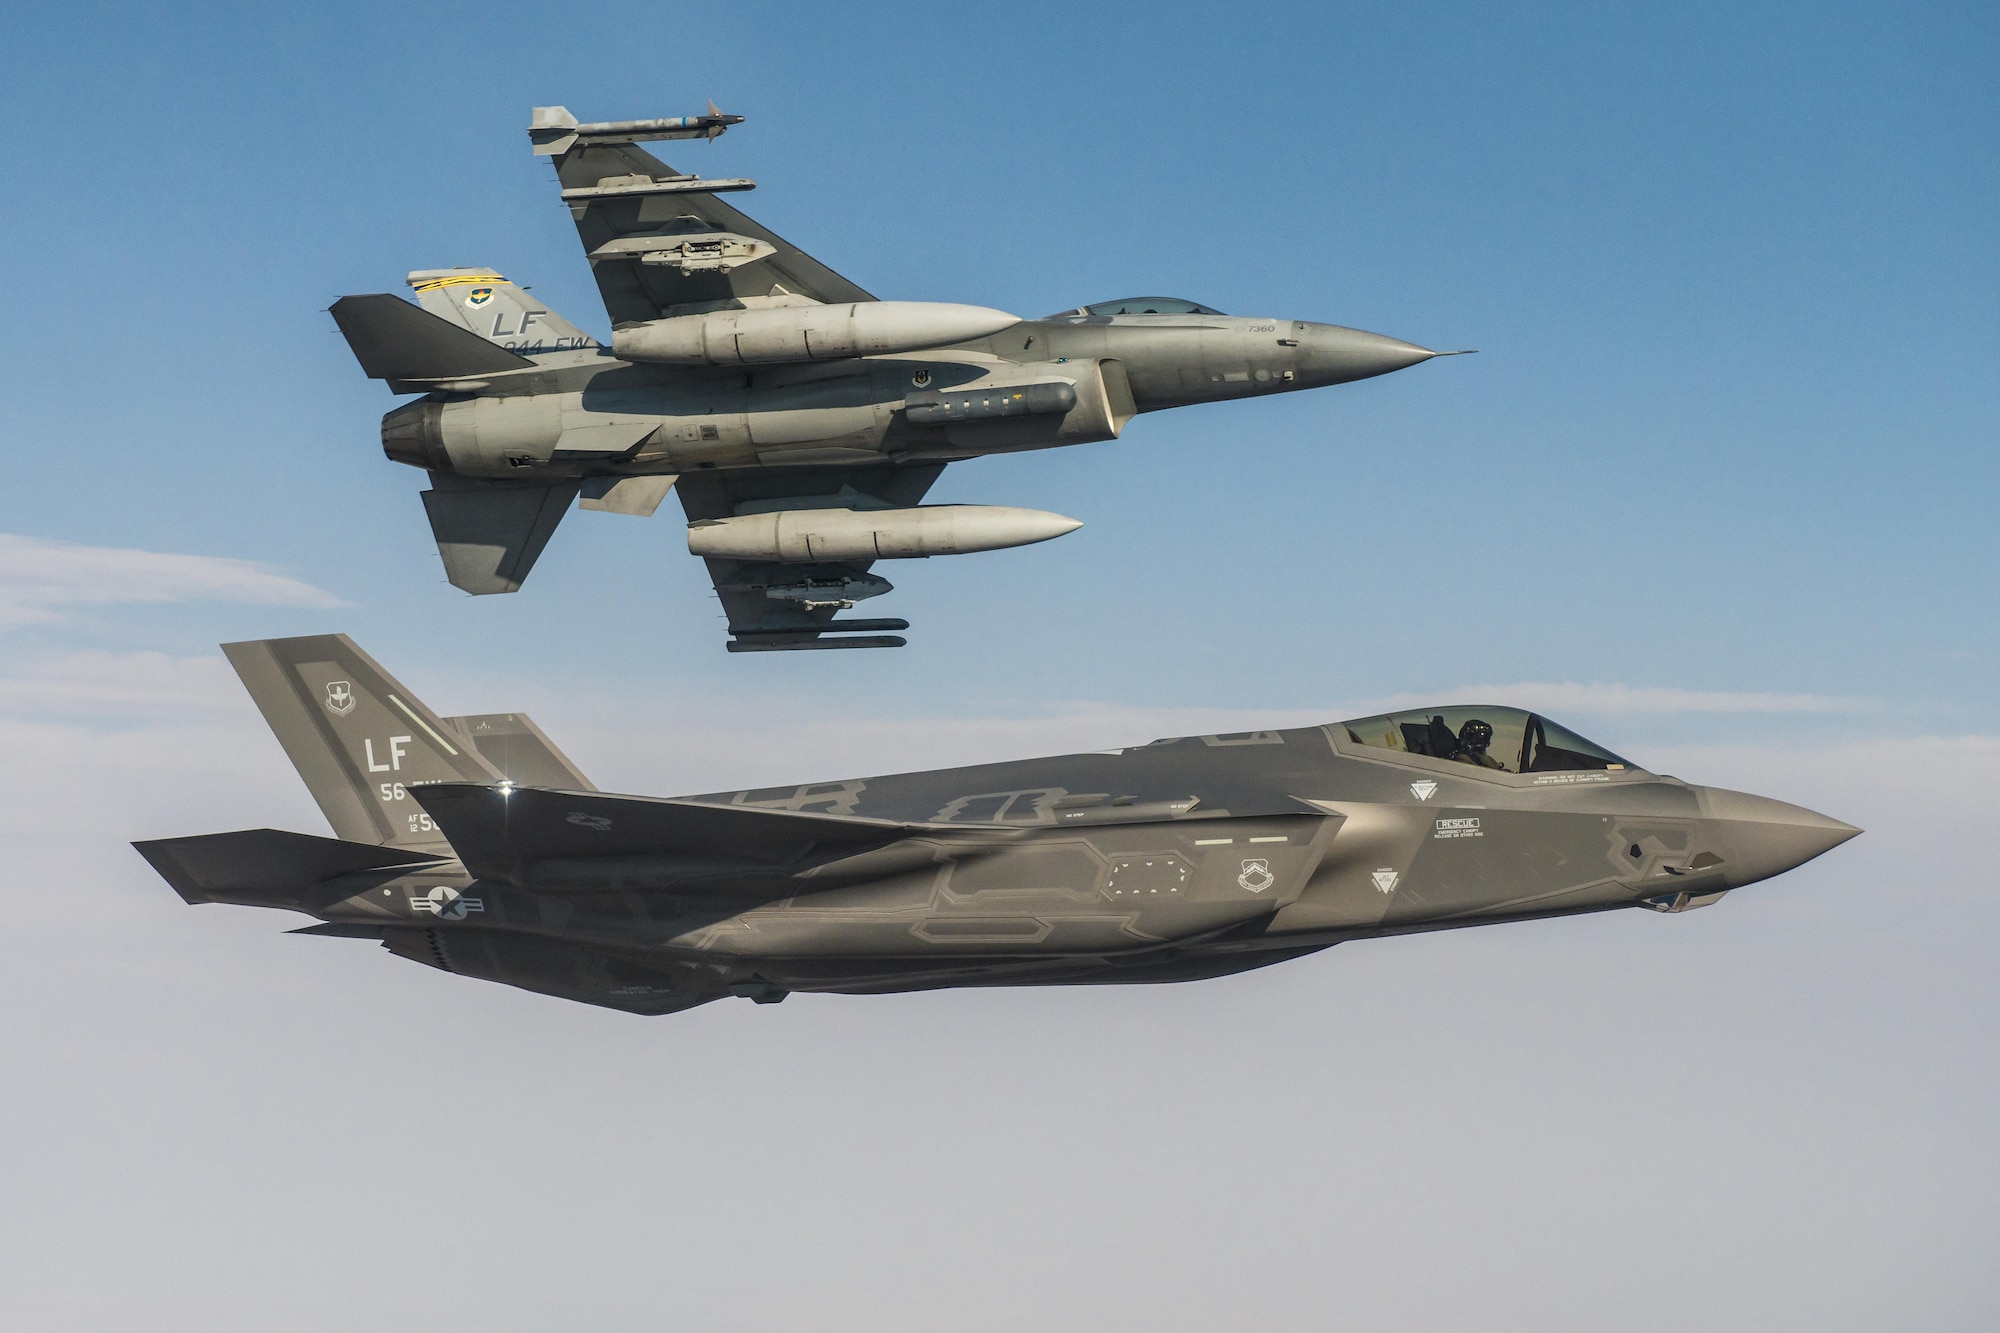 An F-35 Lightning II flies alongside an F-16 Fighting Falcon June 25, 2015, at Luke Air Force Base. In October, F-35 and F-16 pilots began integrated training designed to improve mission cooperation and flight skills in both airframes. (Courtesy Photo)